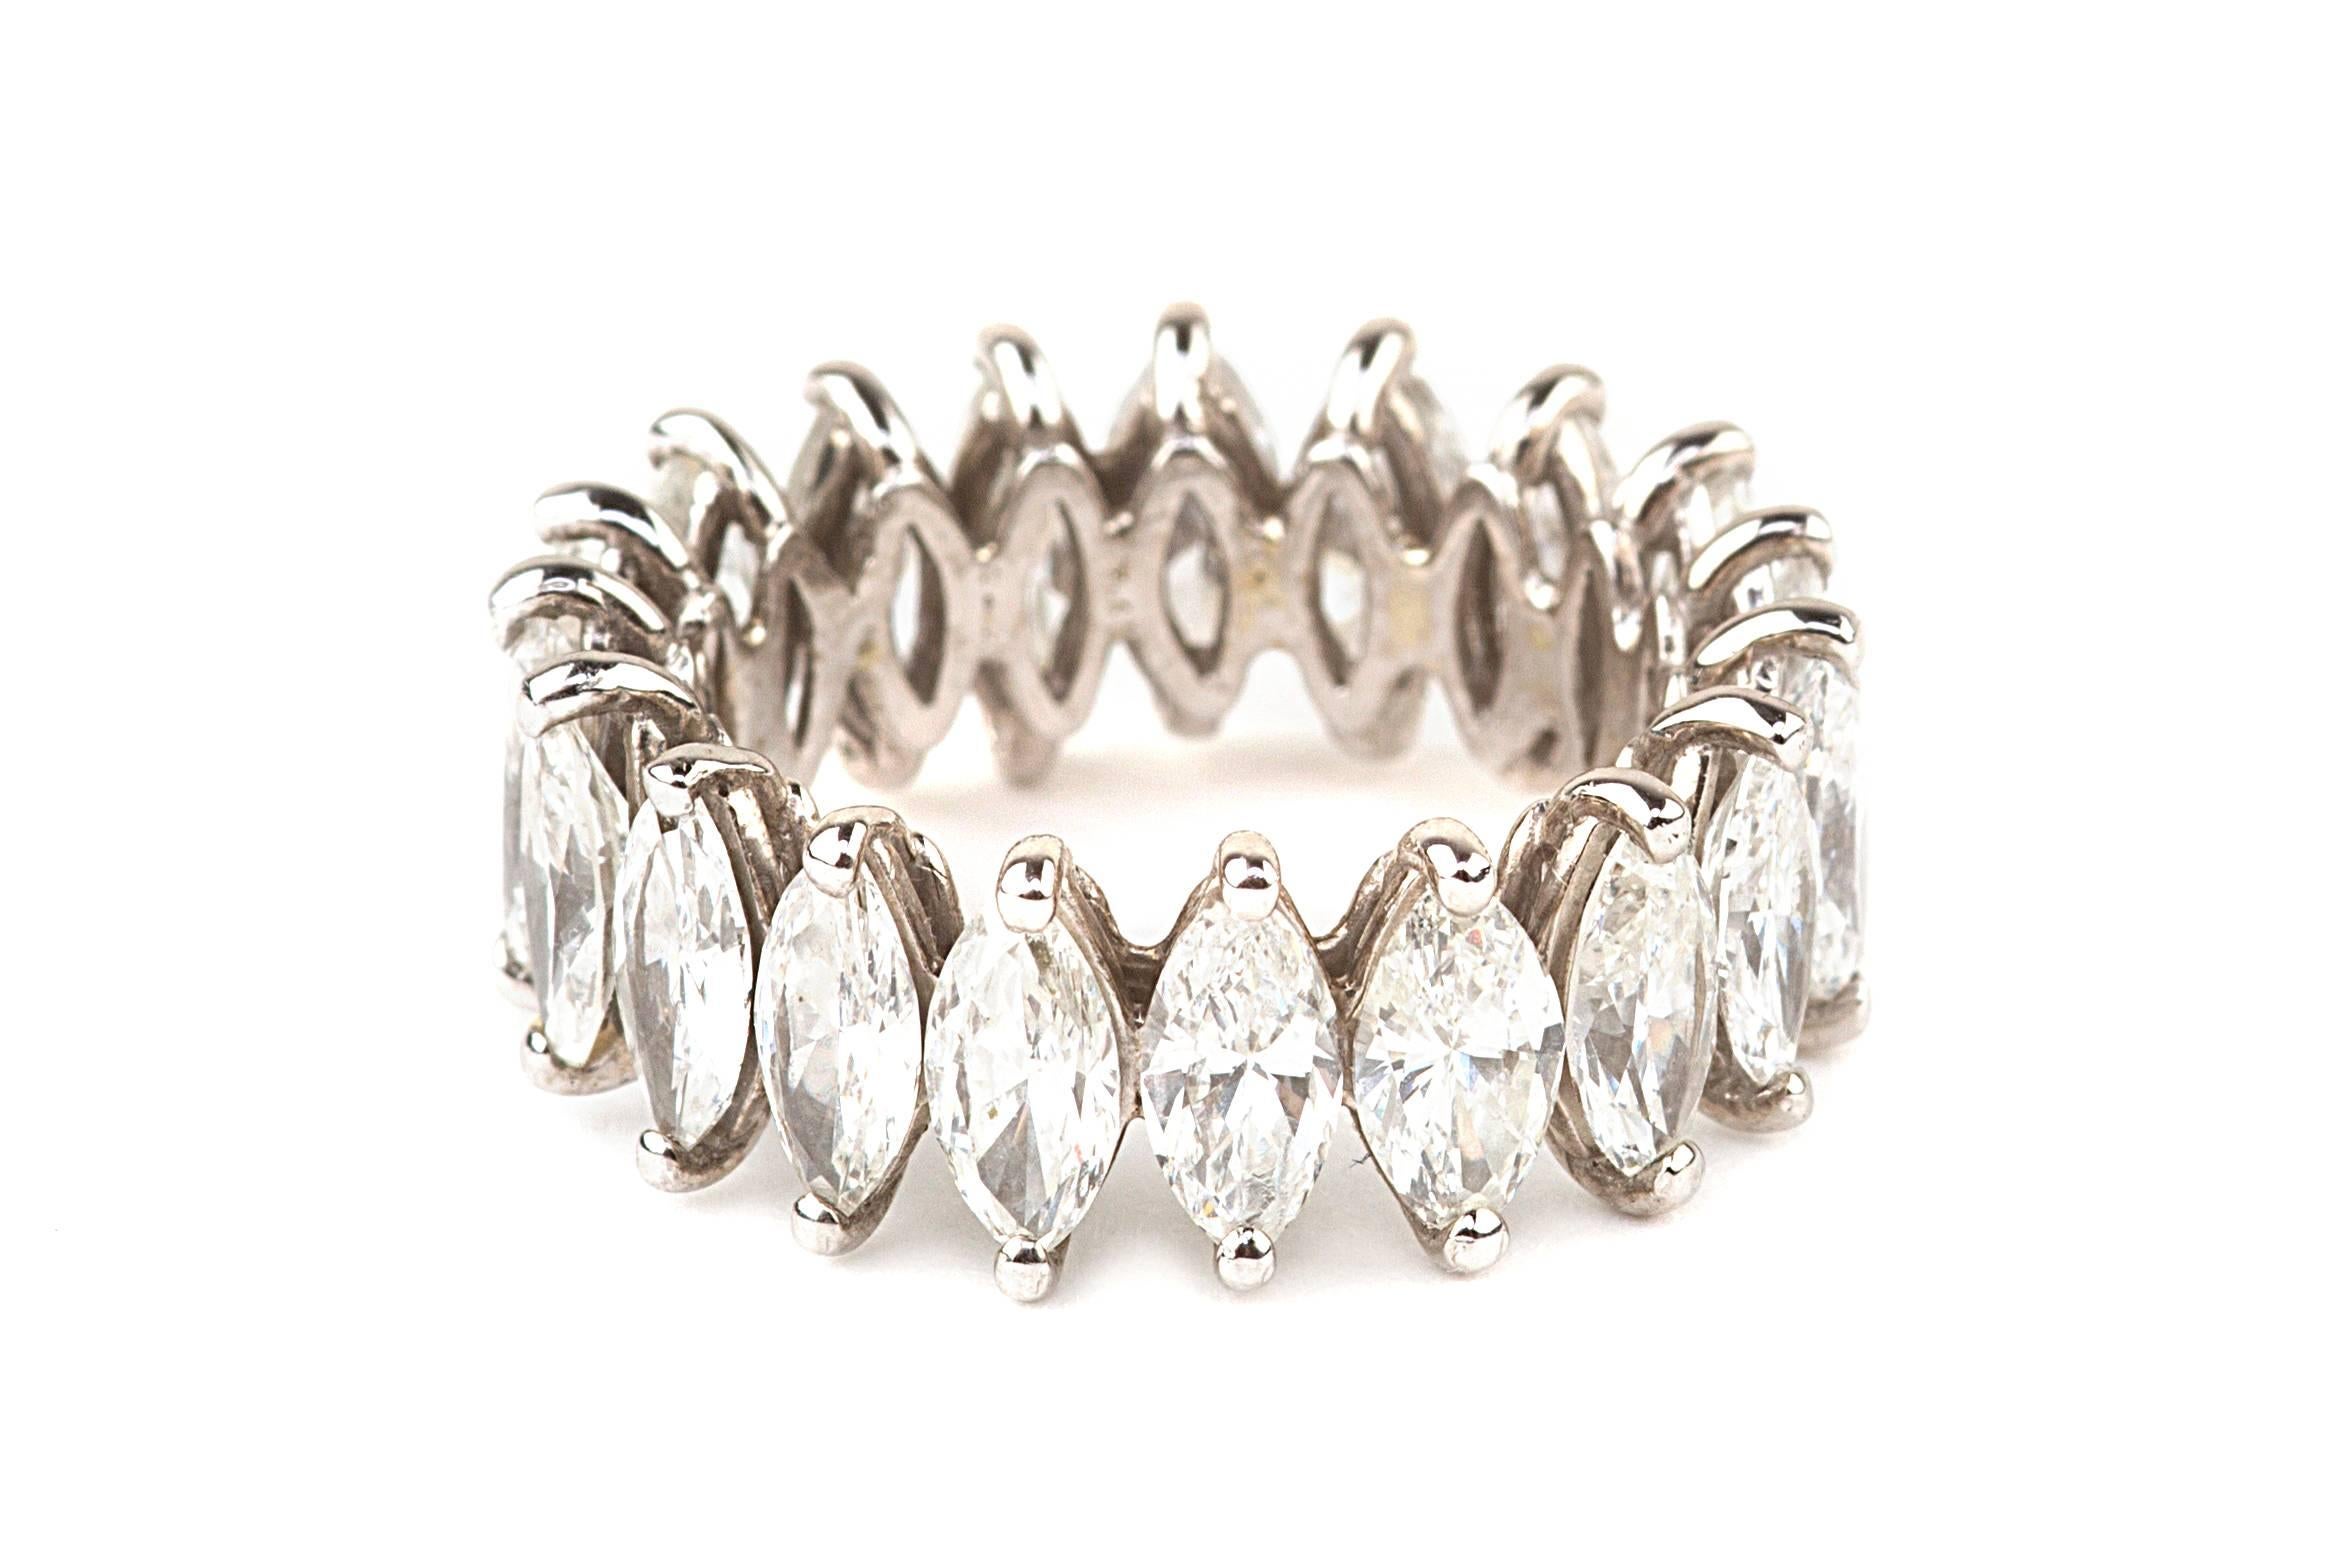 This estate eternity band features 19 marquise shaped diamonds that equal approximately 7.0 carat total weight. The diamonds are graded H/I VS2-SI1, and the ring is size 5 1/4. The band is 14 karat white gold. 